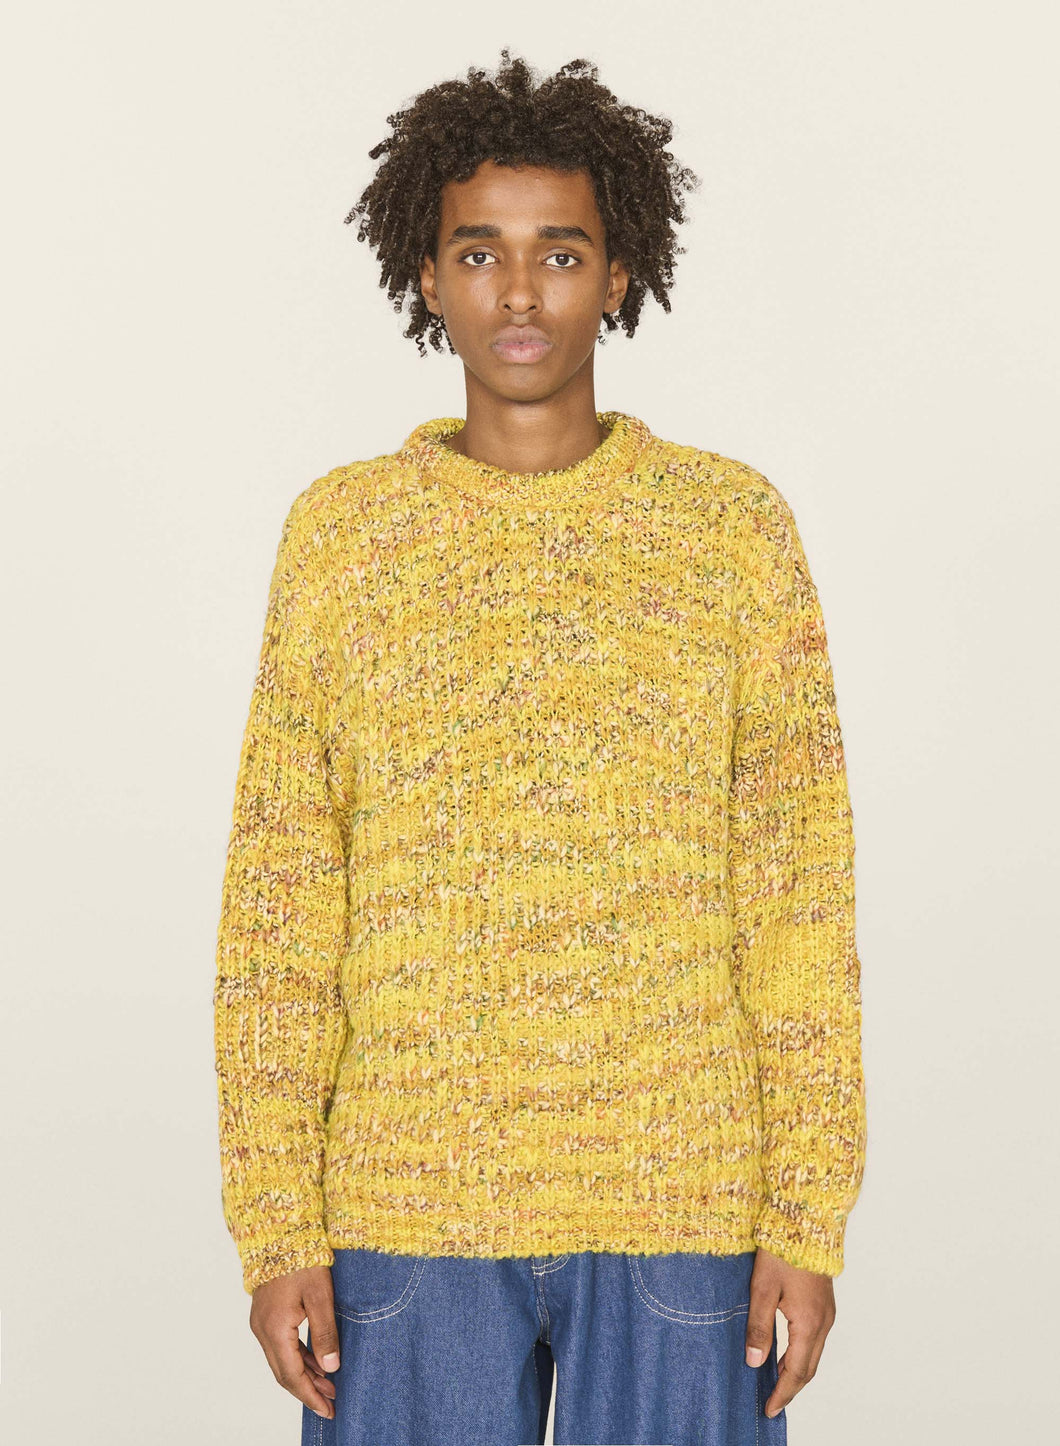 MEN'S GRANNY SPACE DYED JUMPER YELLOW MULTI